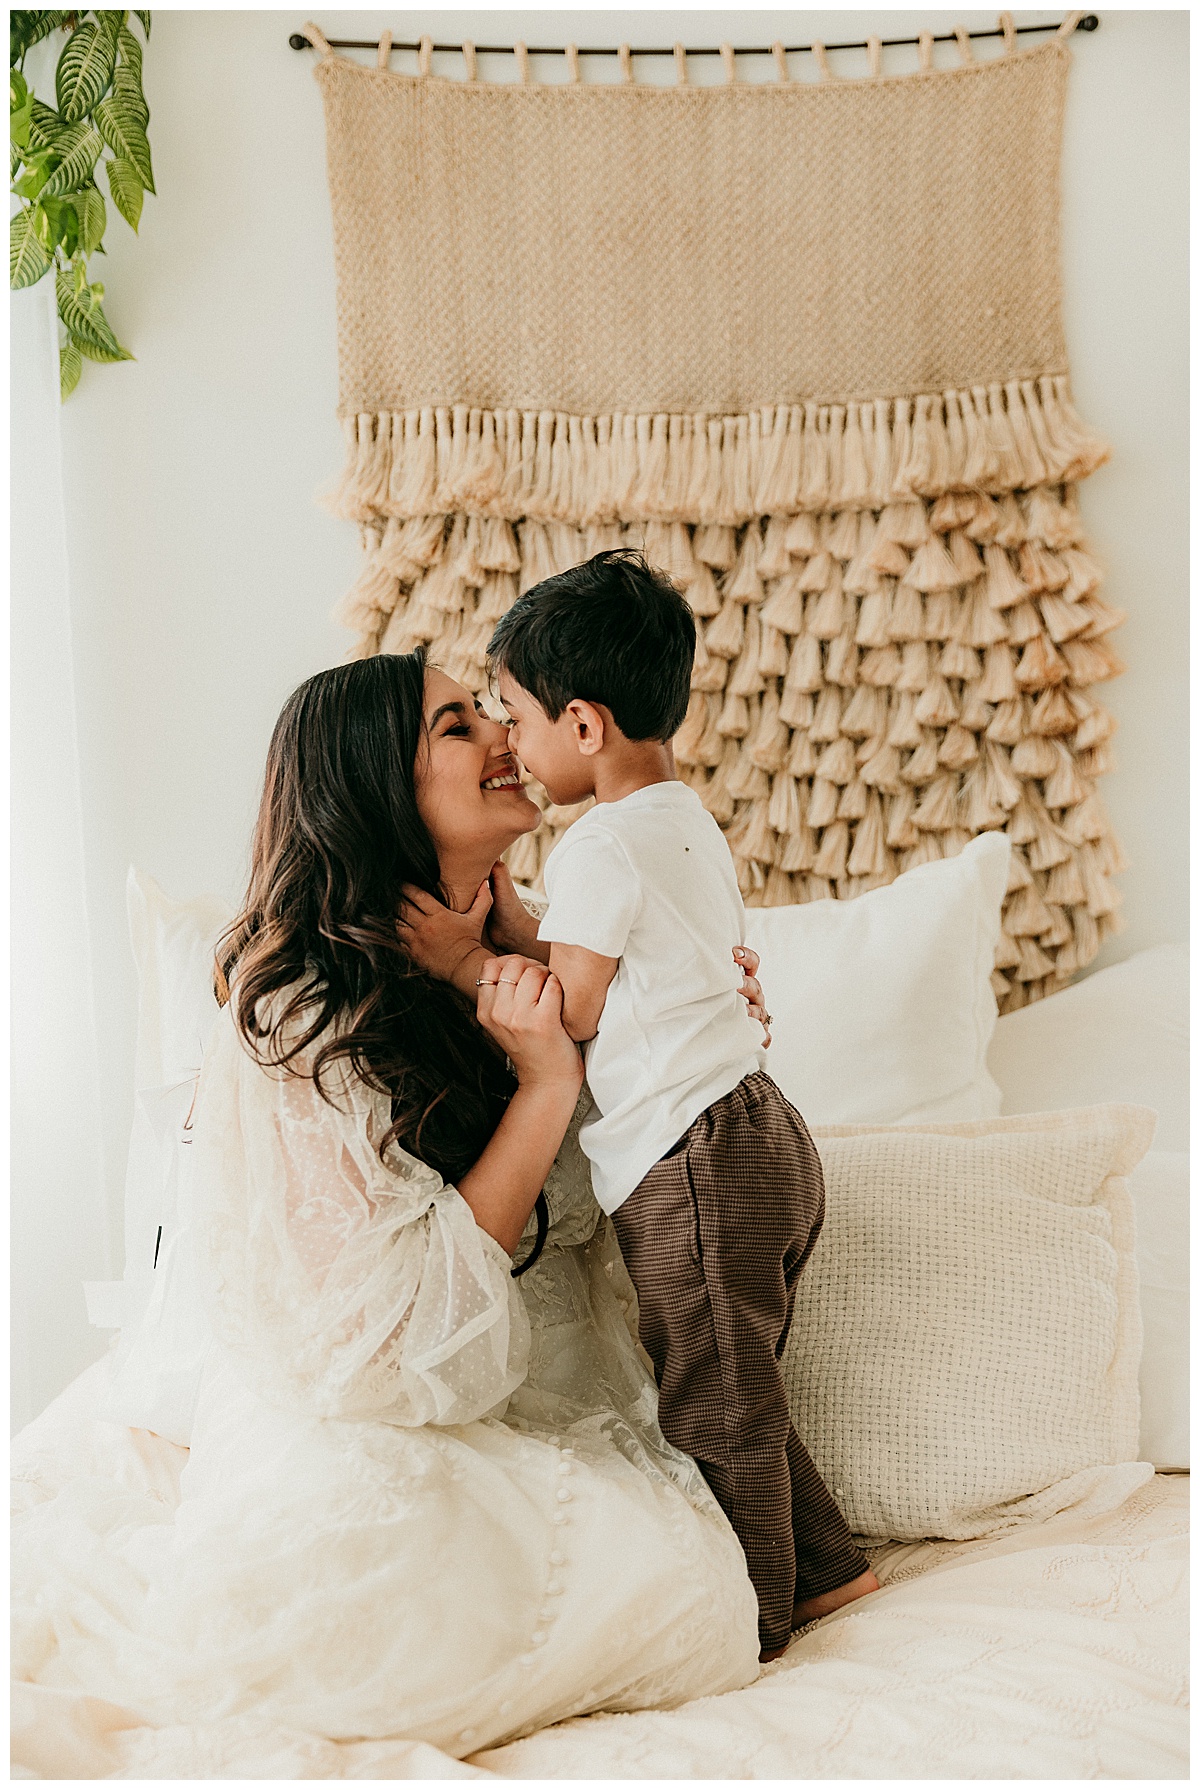 Mom and son spend time together for Family Photos